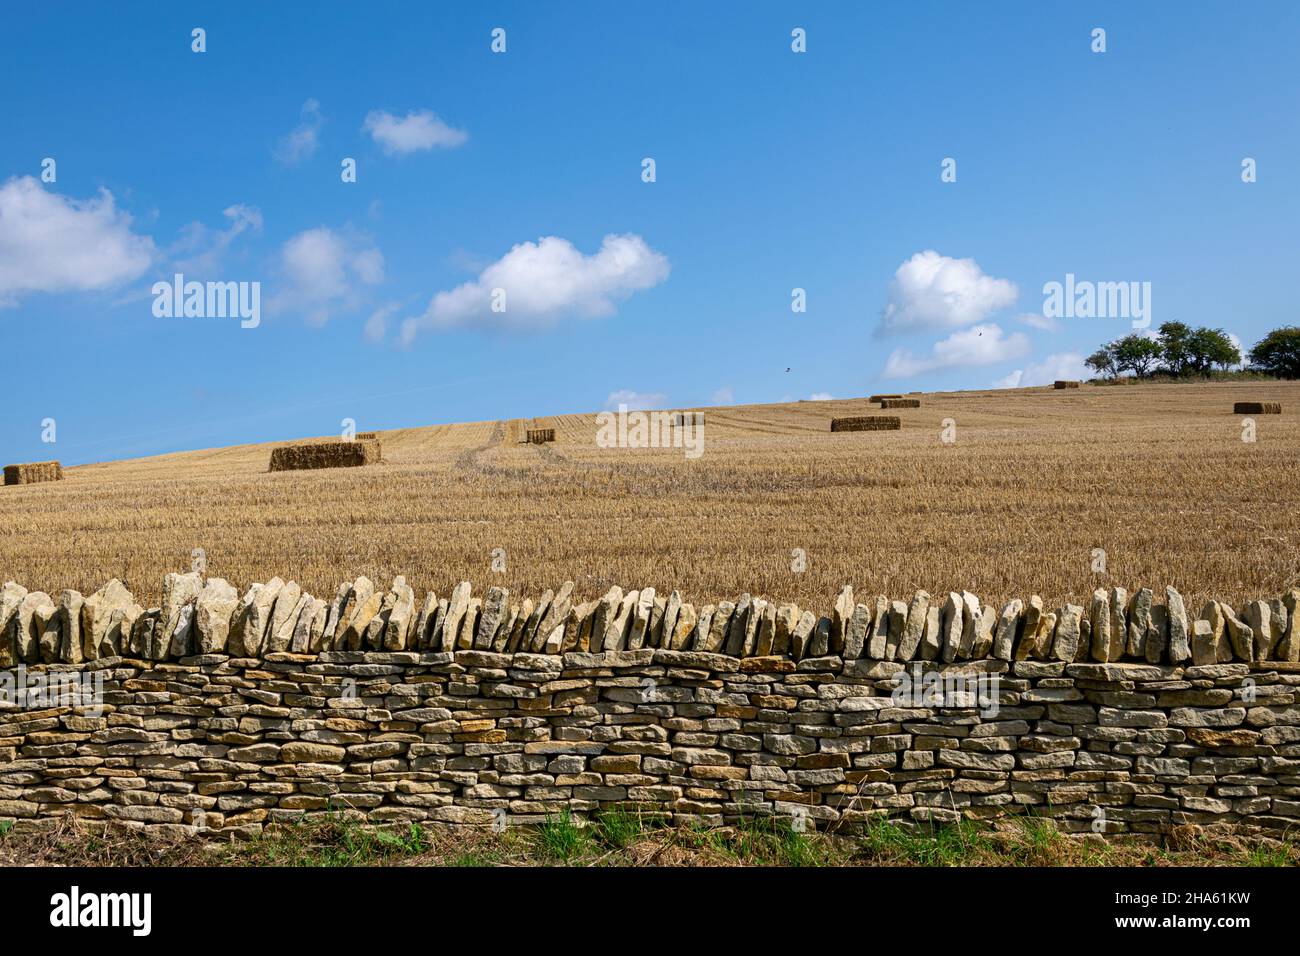 A field after harvest with rectangular bales surrounded by a cotswold stone wall Stock Photo